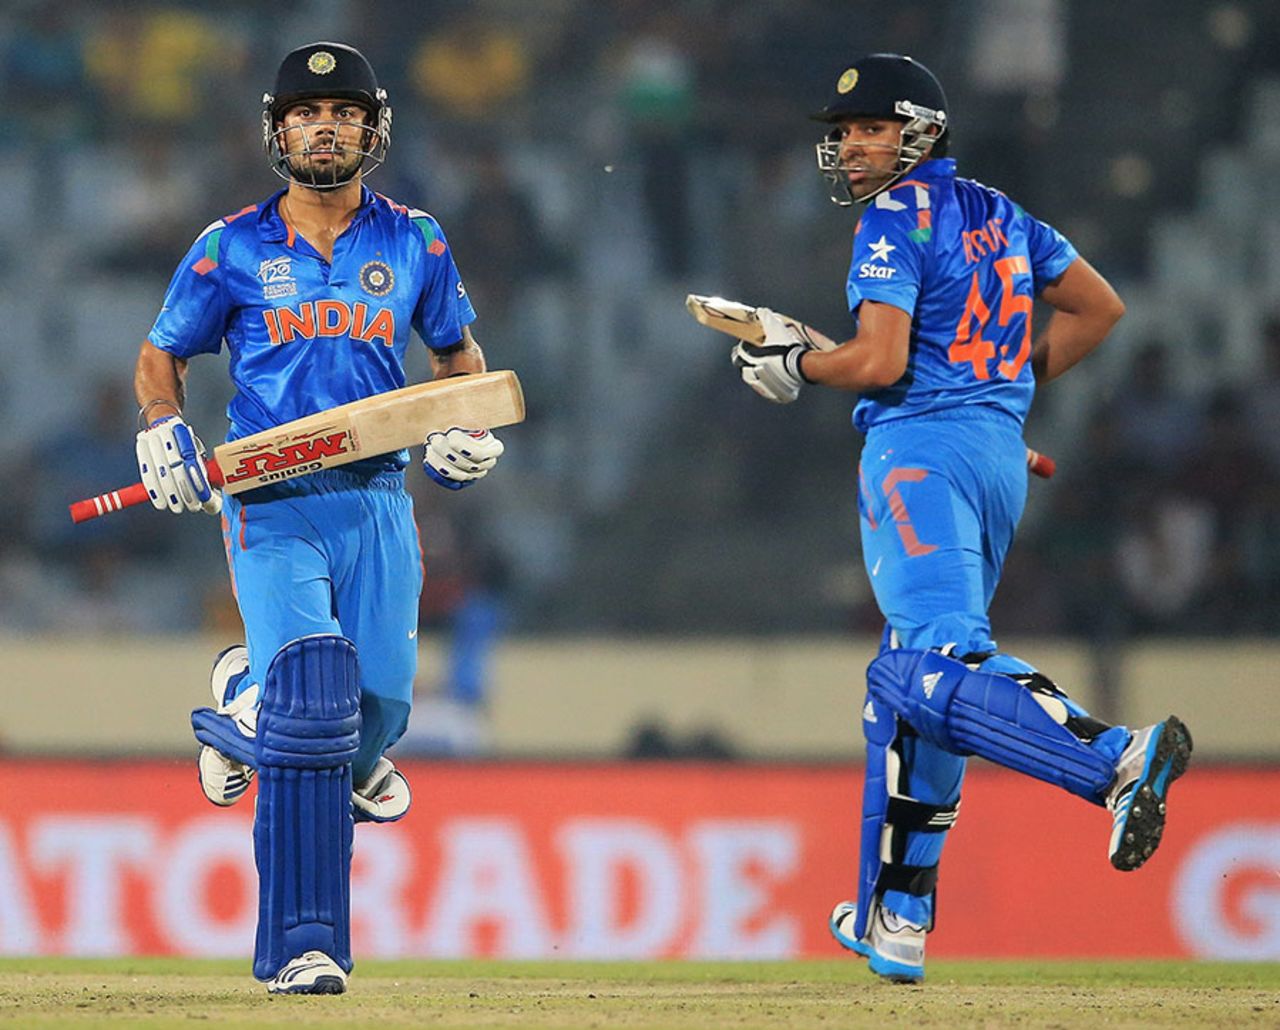 Virat Kohli and Rohit Sharma added 106 for the second wicket, India v West Indies, World T20, Group 2, Mirpur, March 23, 2014